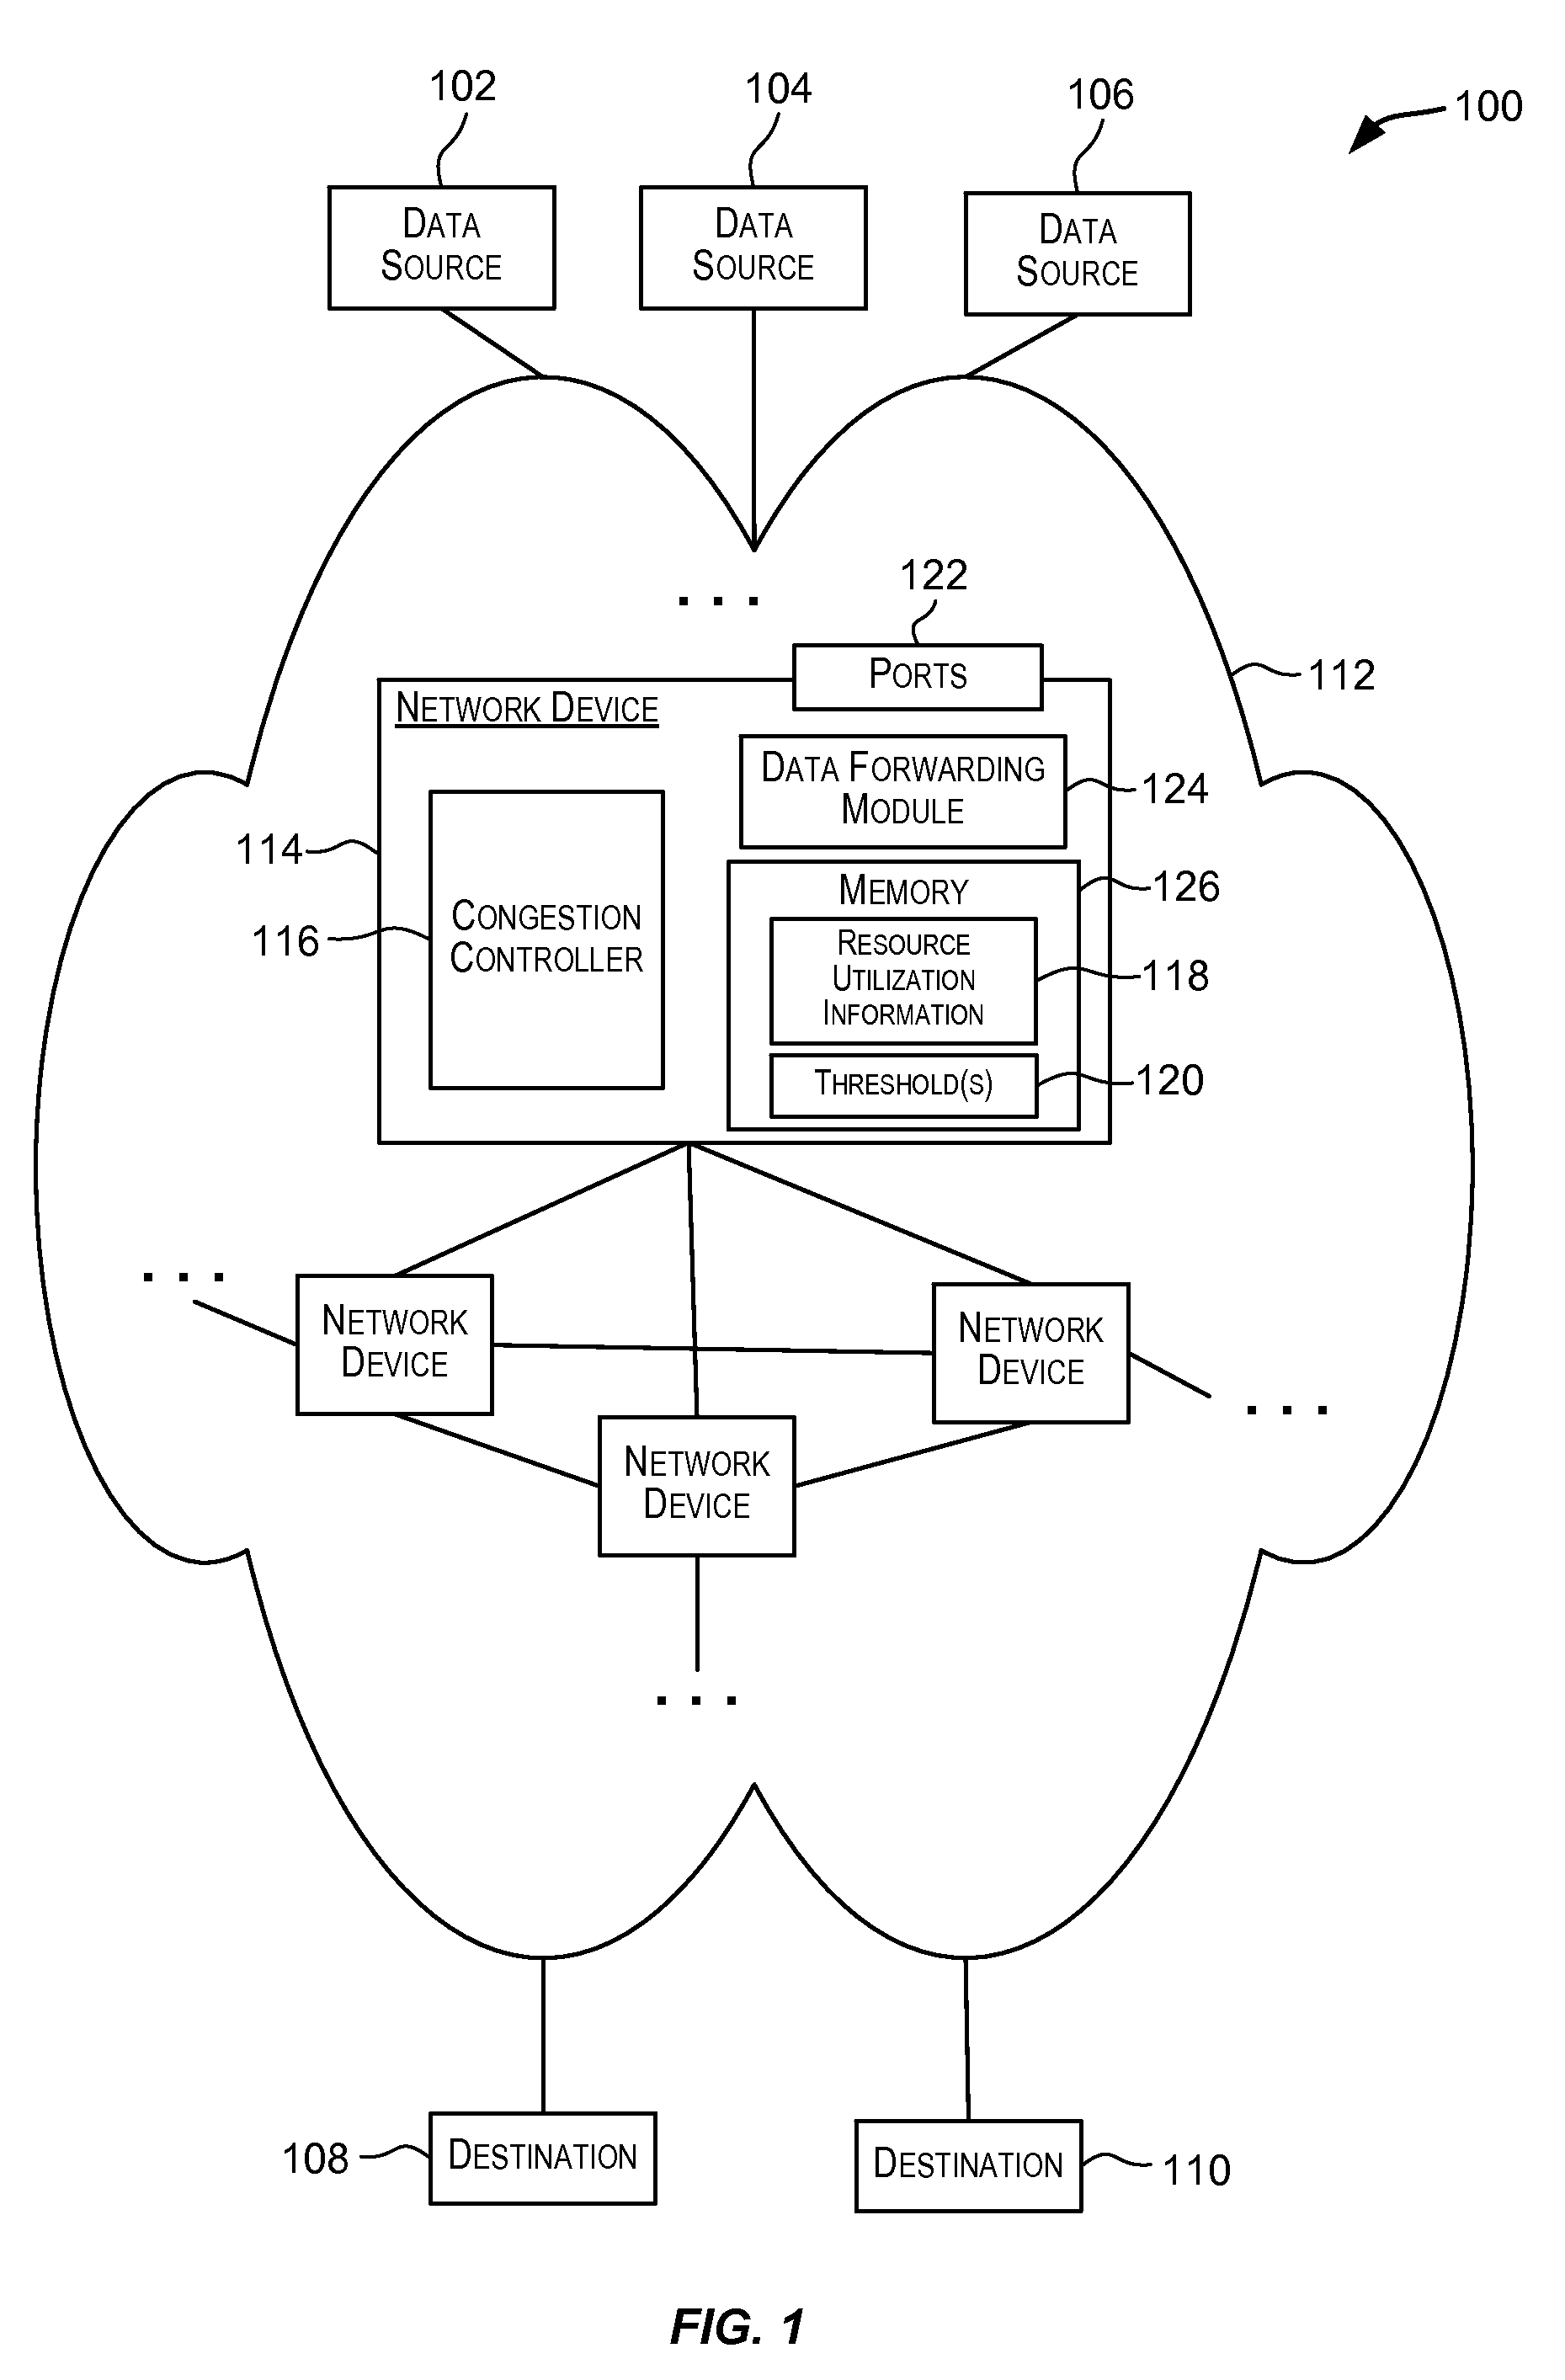 Source-based congestion detection and control